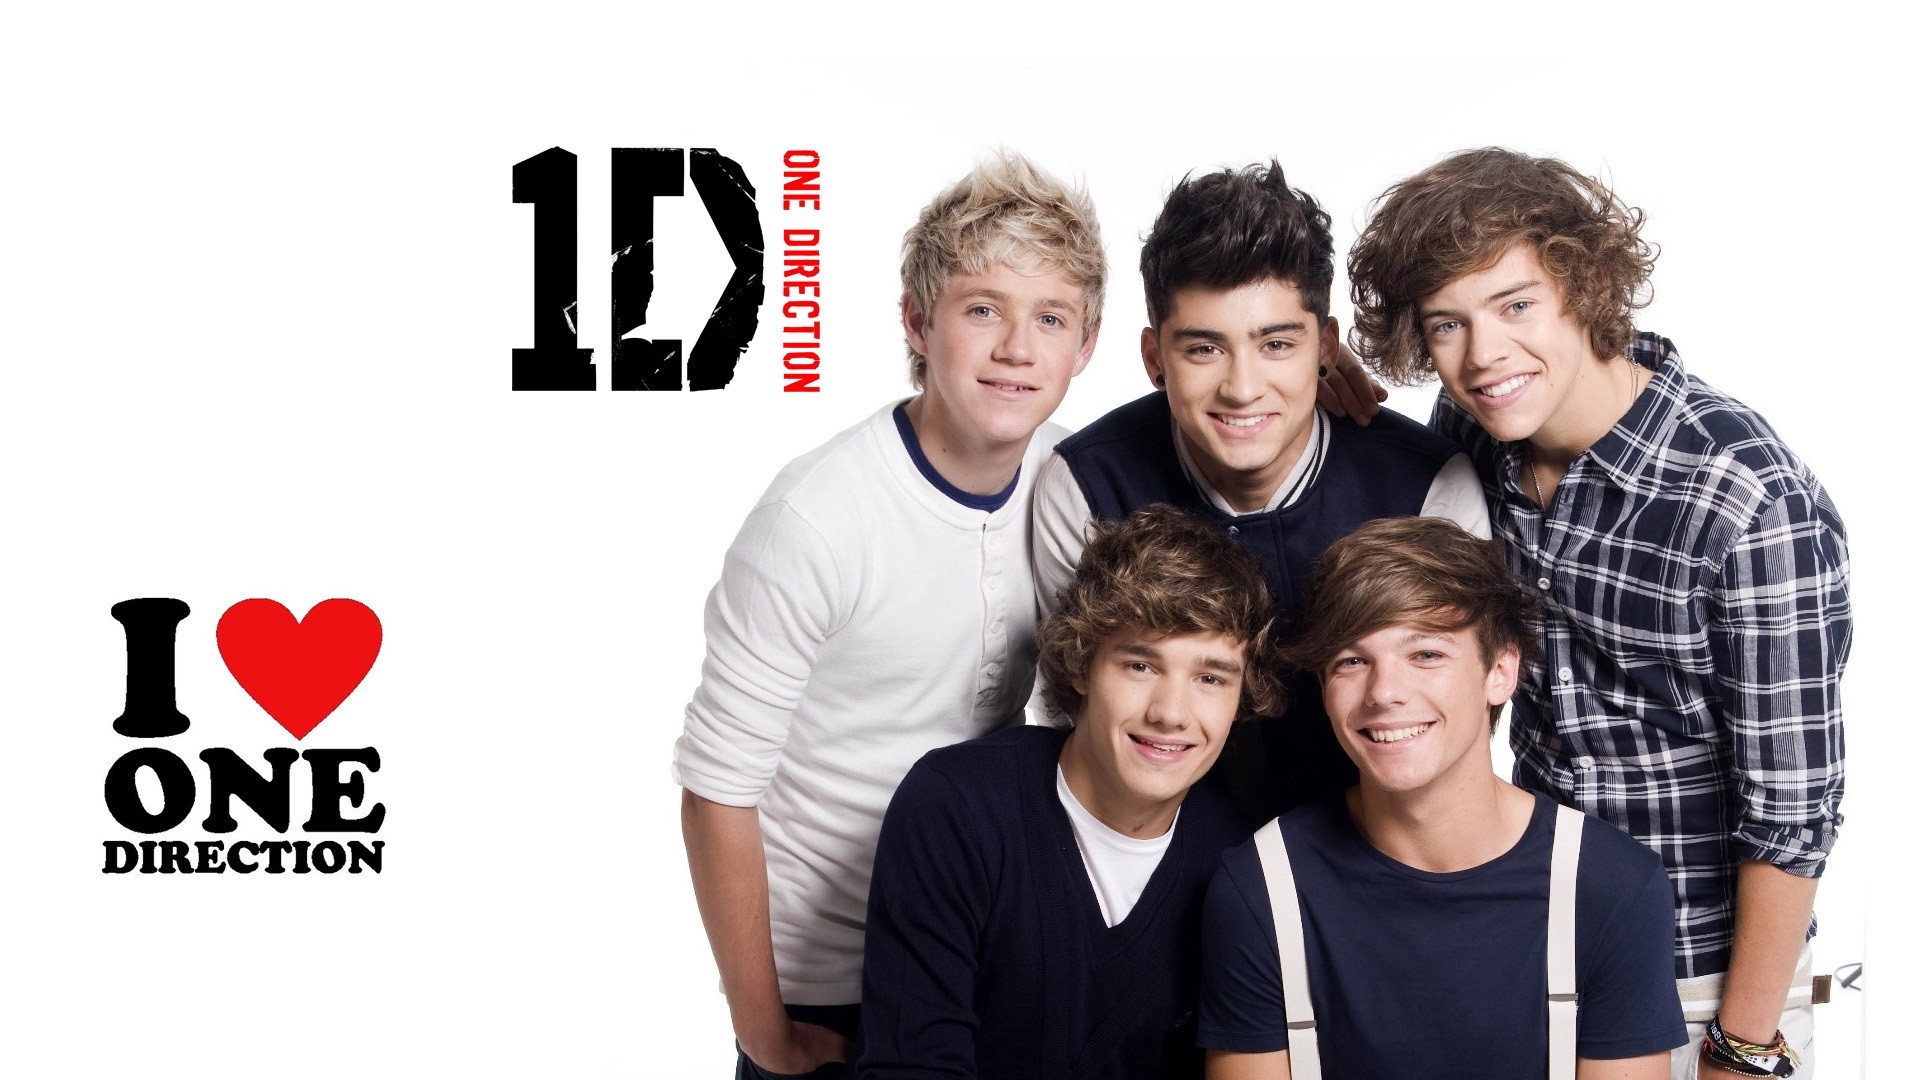 1920x1080 One Direction Desktop Background Hd. One Direction Wallpaper.